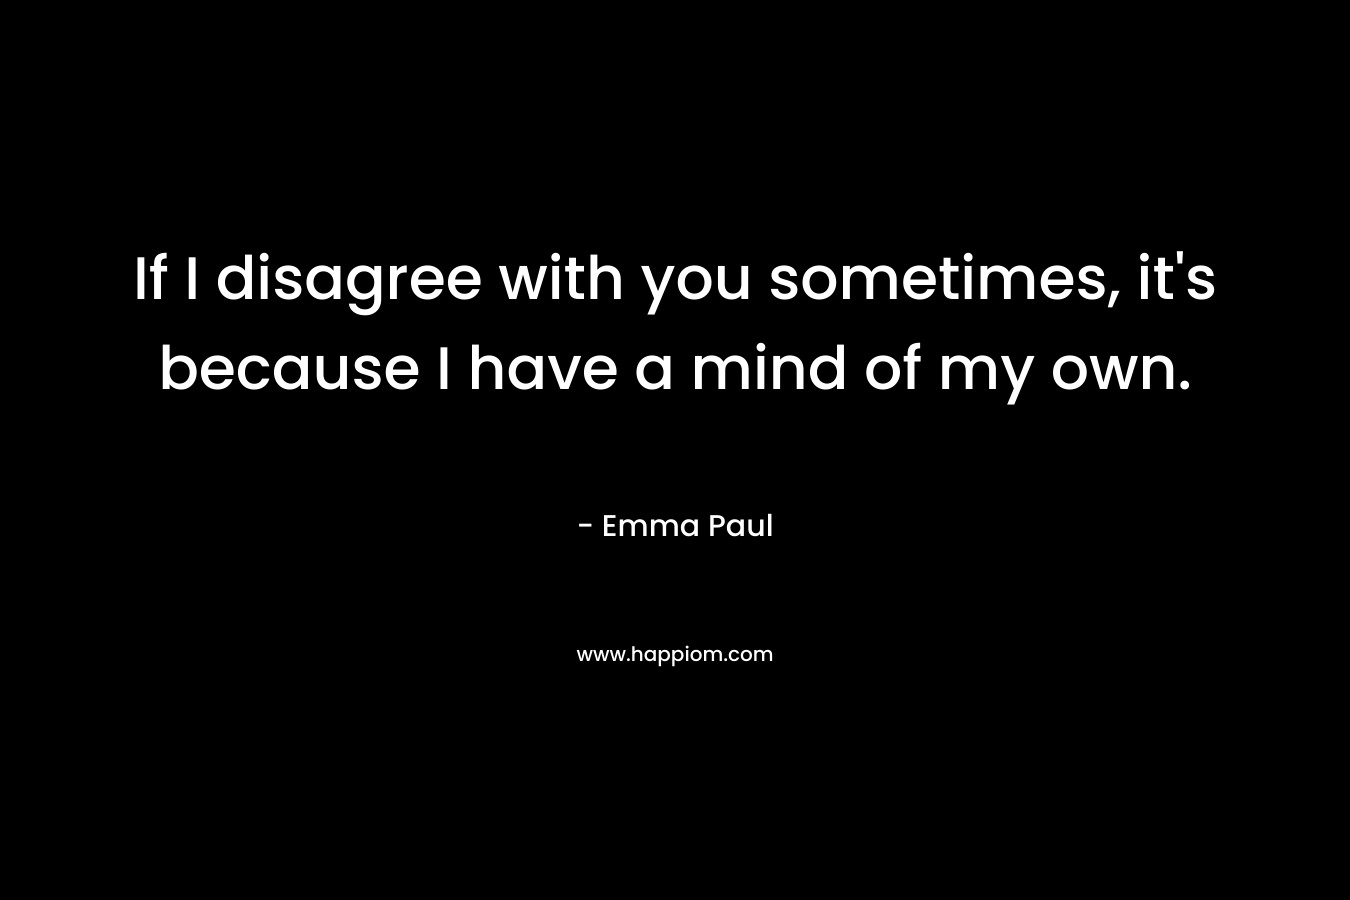 If I disagree with you sometimes, it’s because I have a mind of my own. – Emma Paul